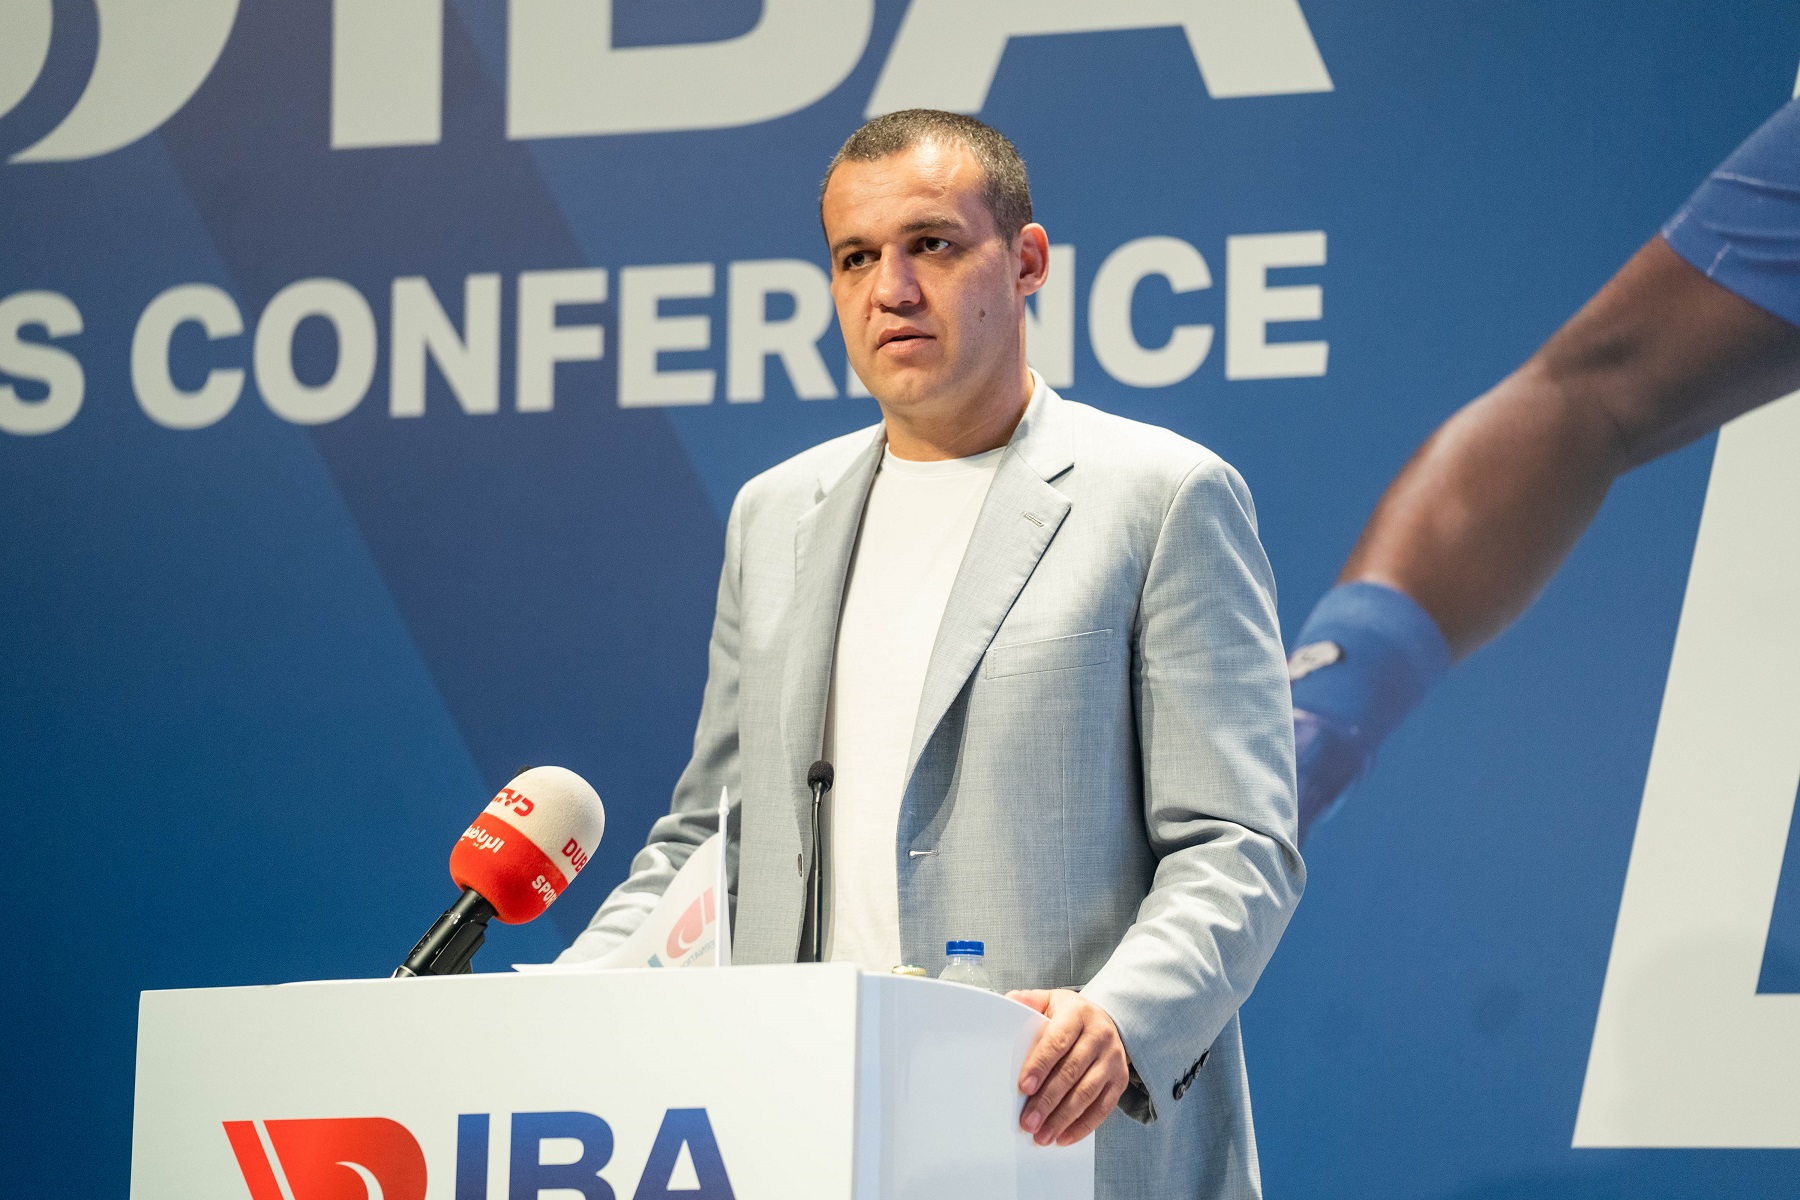 IBA to focus on "Pro-Style" boxing following IOC expulsion